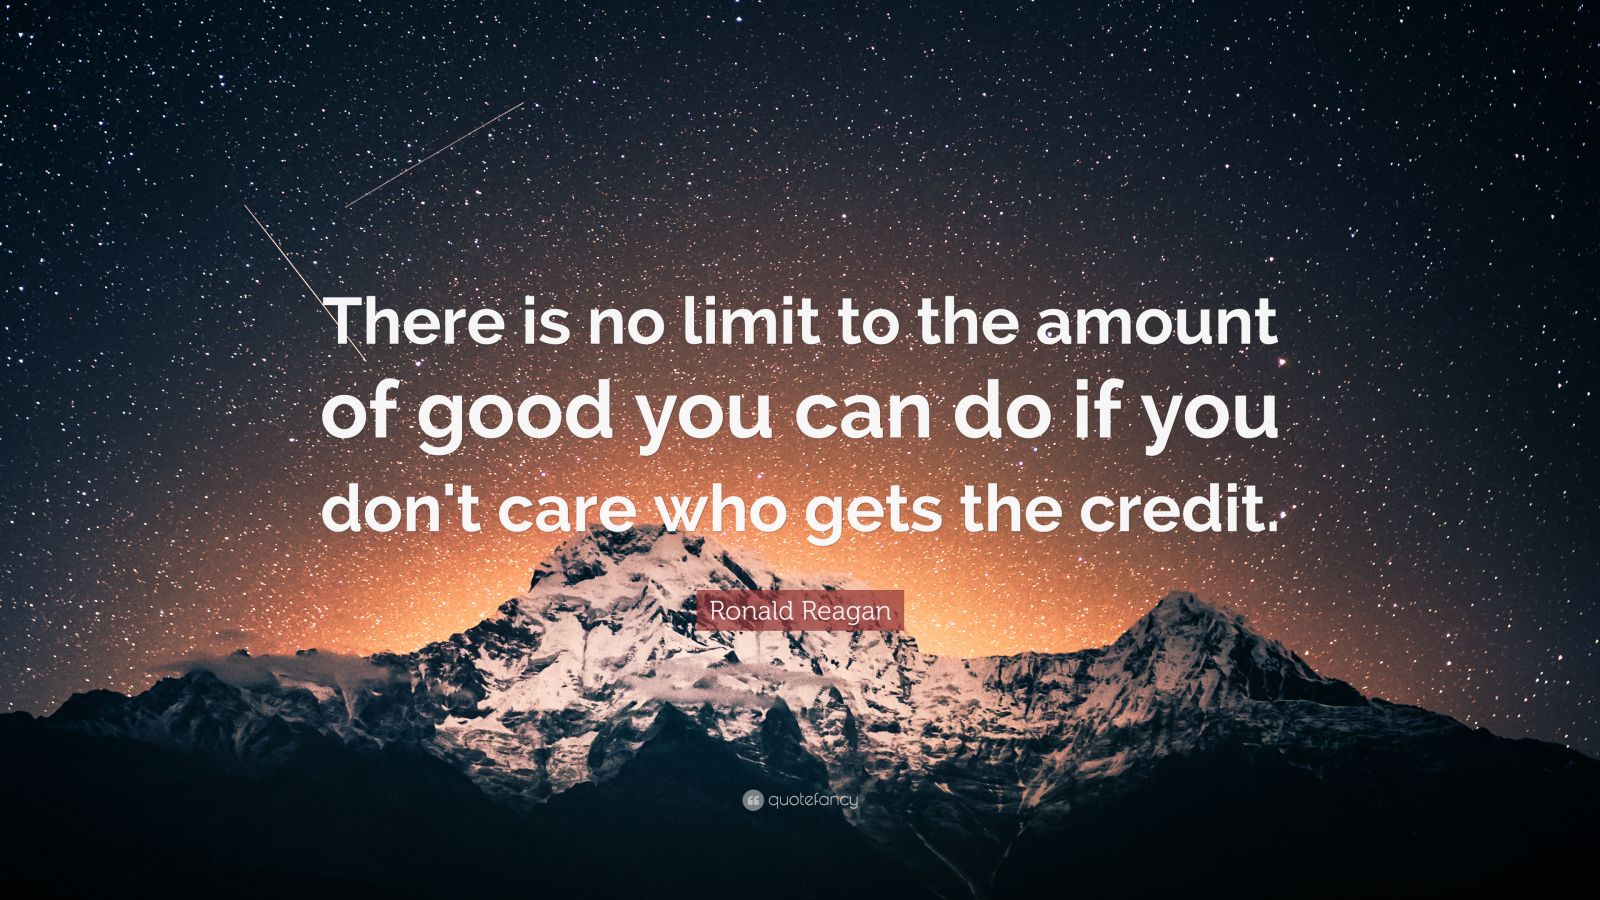 Ronald Reagan Quote: “There is no limit to the amount of good you can